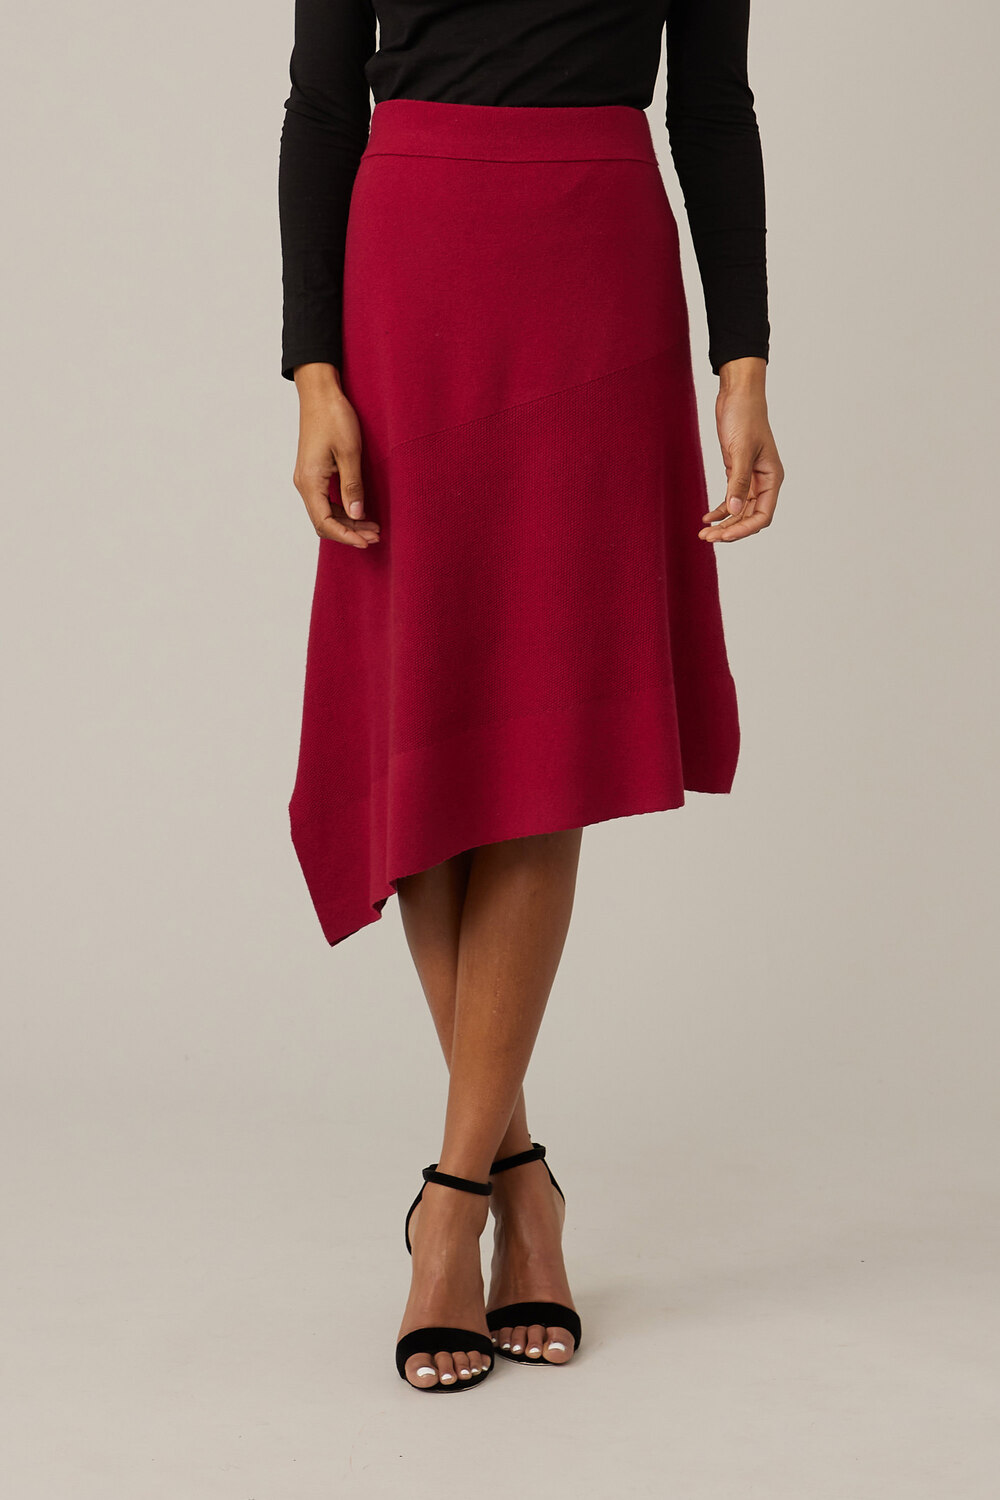 Emproved Knit Skirt Style A2234. Ruby